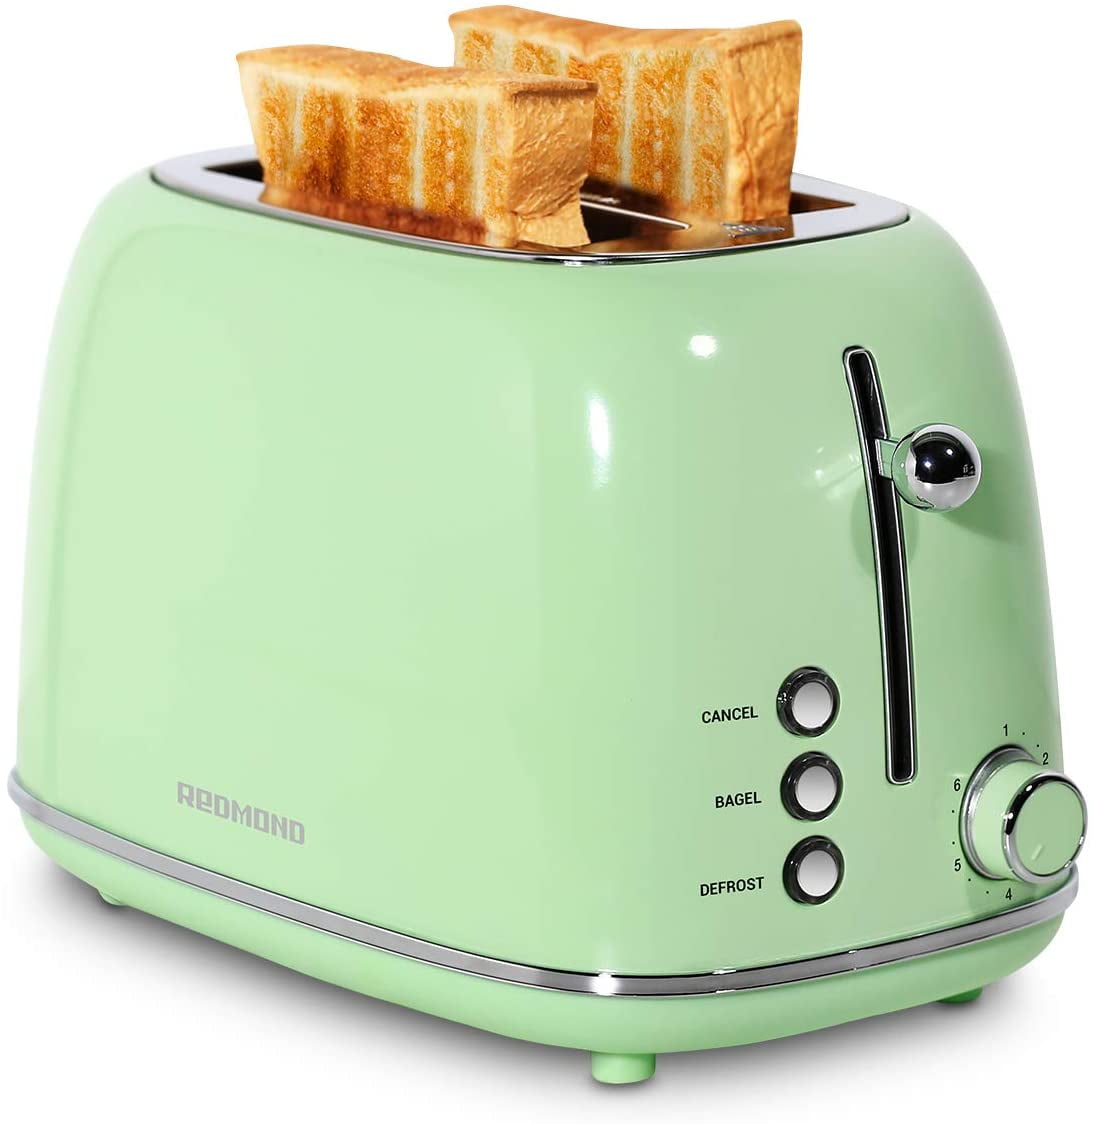 Cotomier Toaster 2 Slice, Retro Cream White Stainless Steel Toaster with  Defrost Bagel Cancel Function & 6 Shade Settings (Rose Gold)